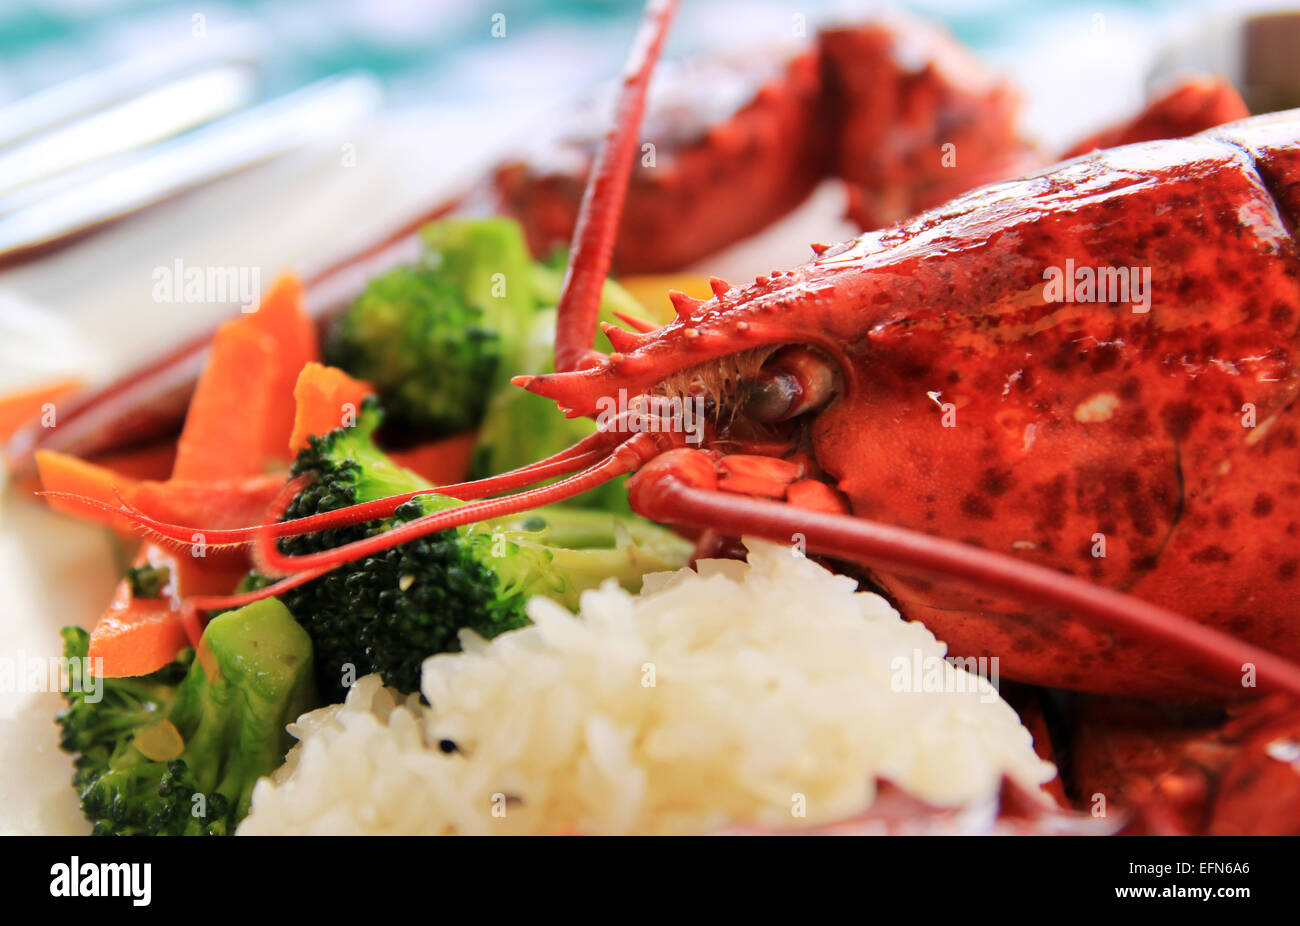 A cooked lobster on a plate with vegetables. Stock Photo